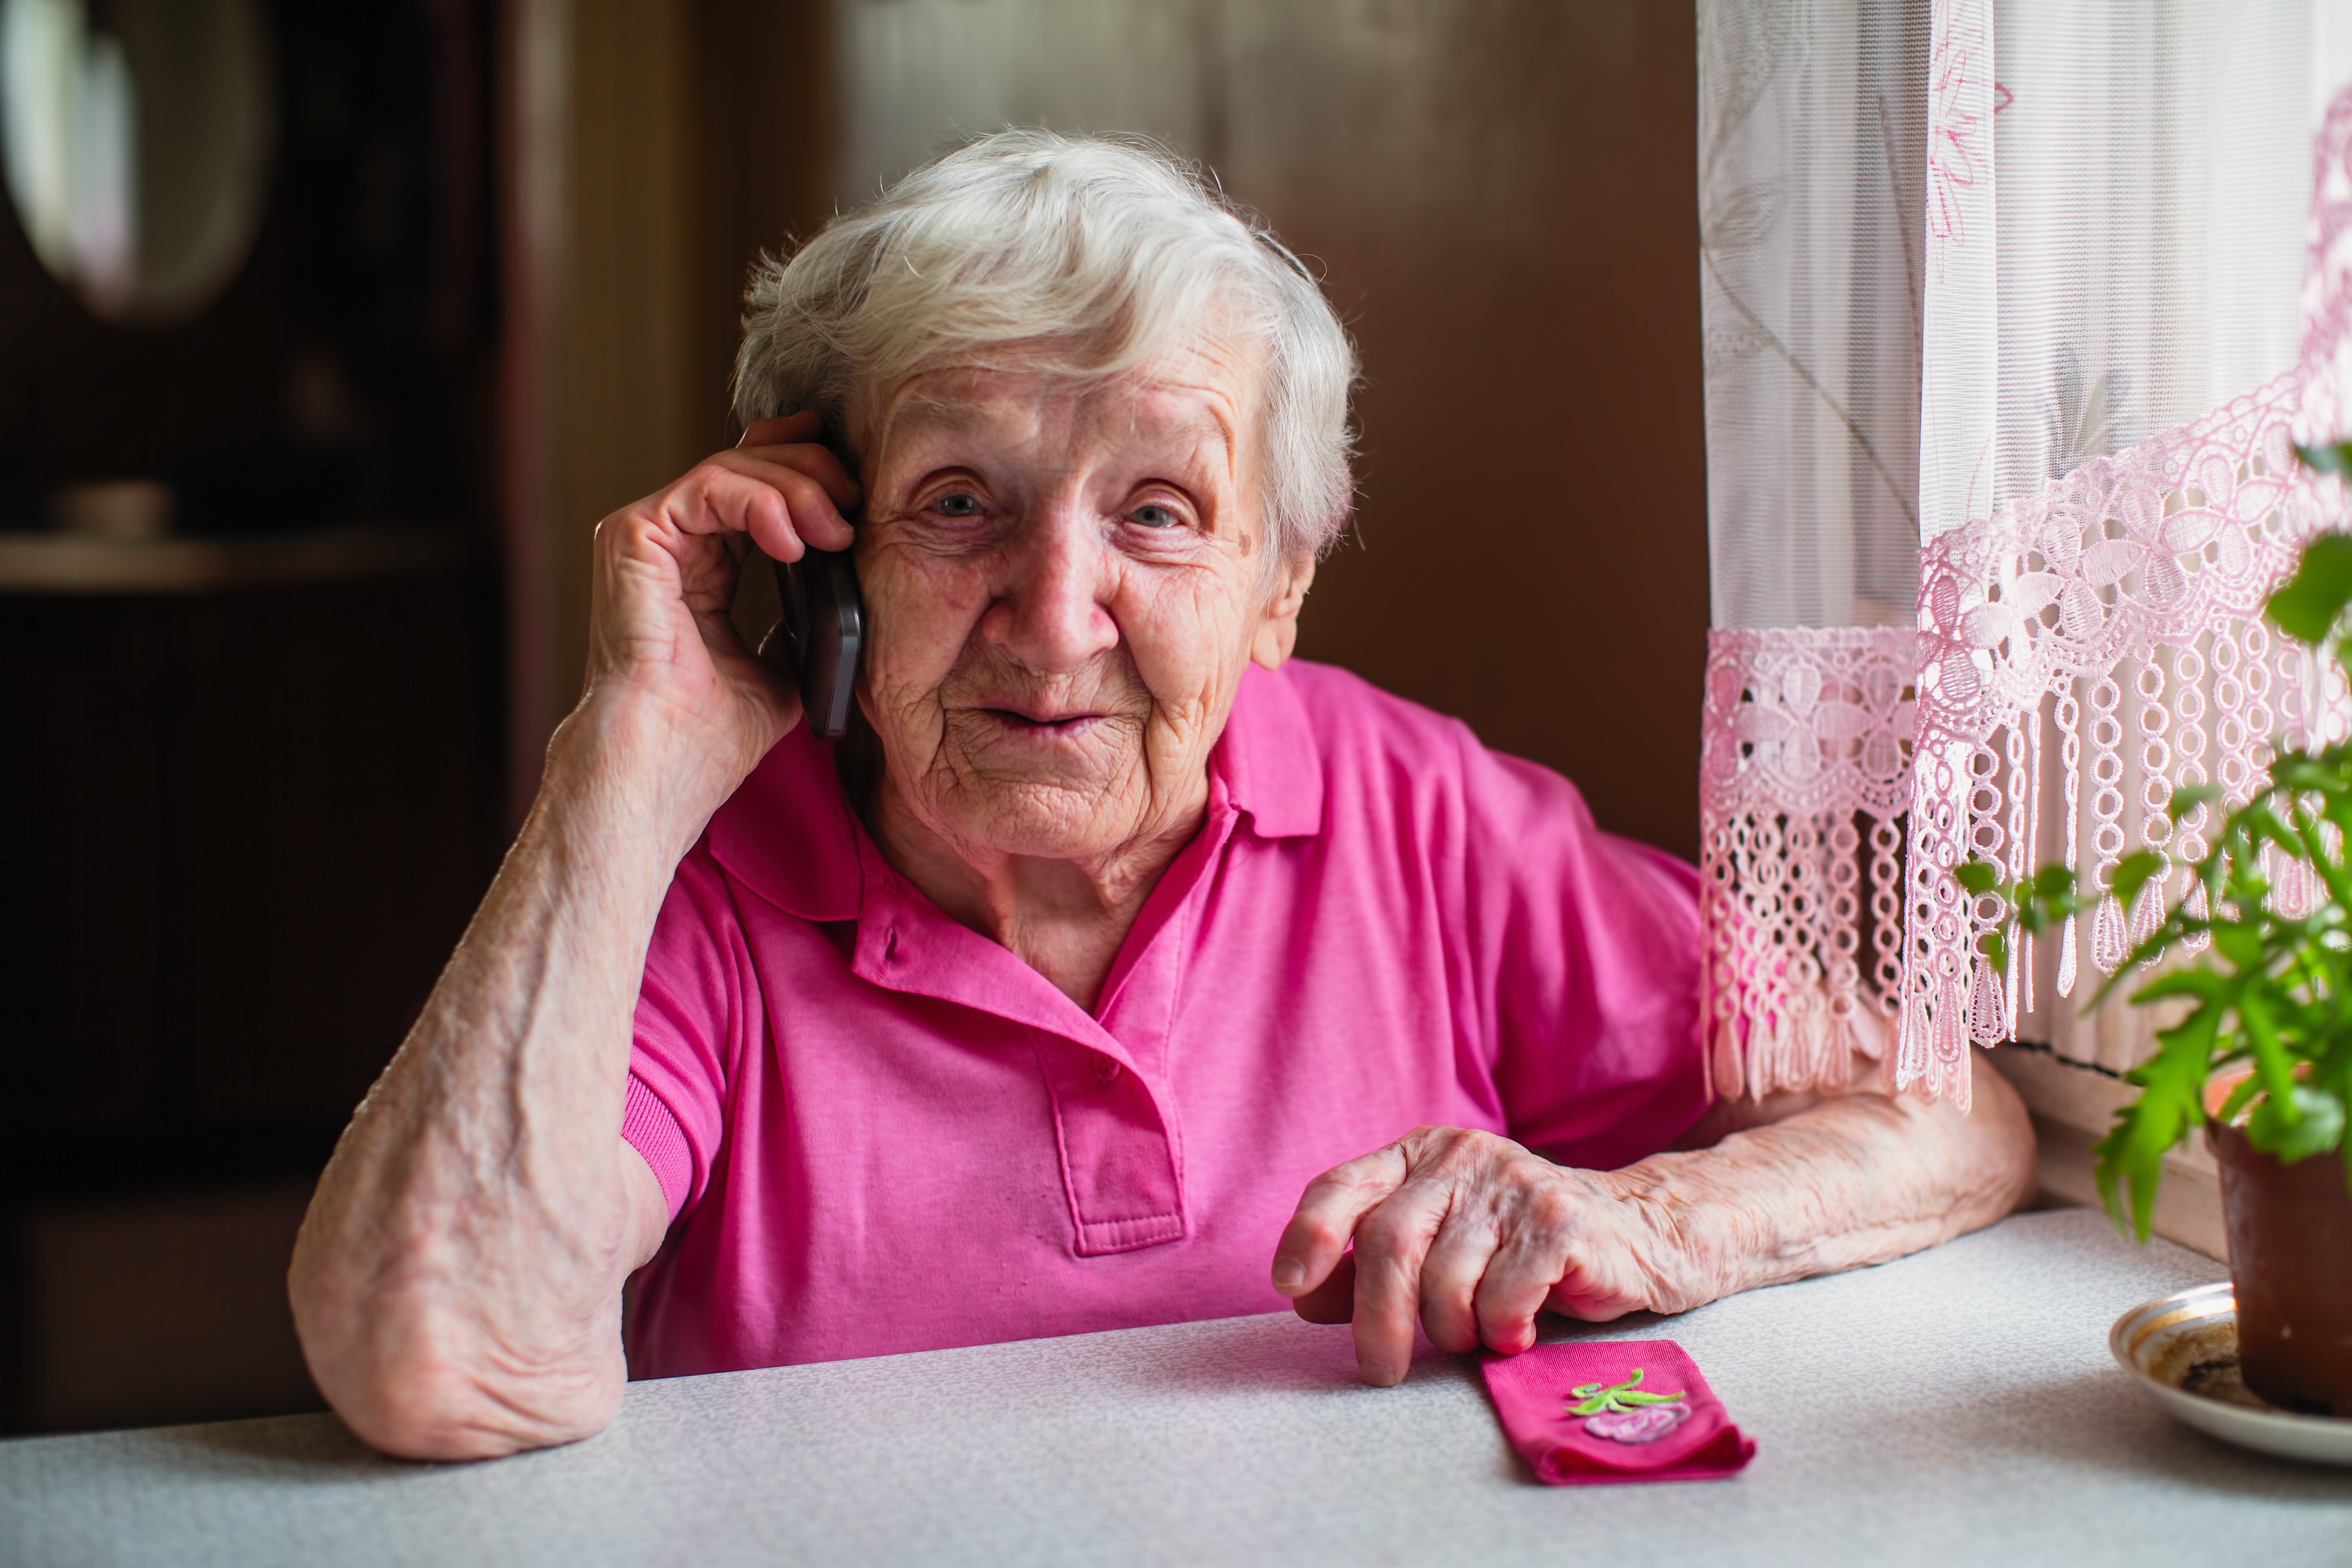 Older adult talking on a smart phone device